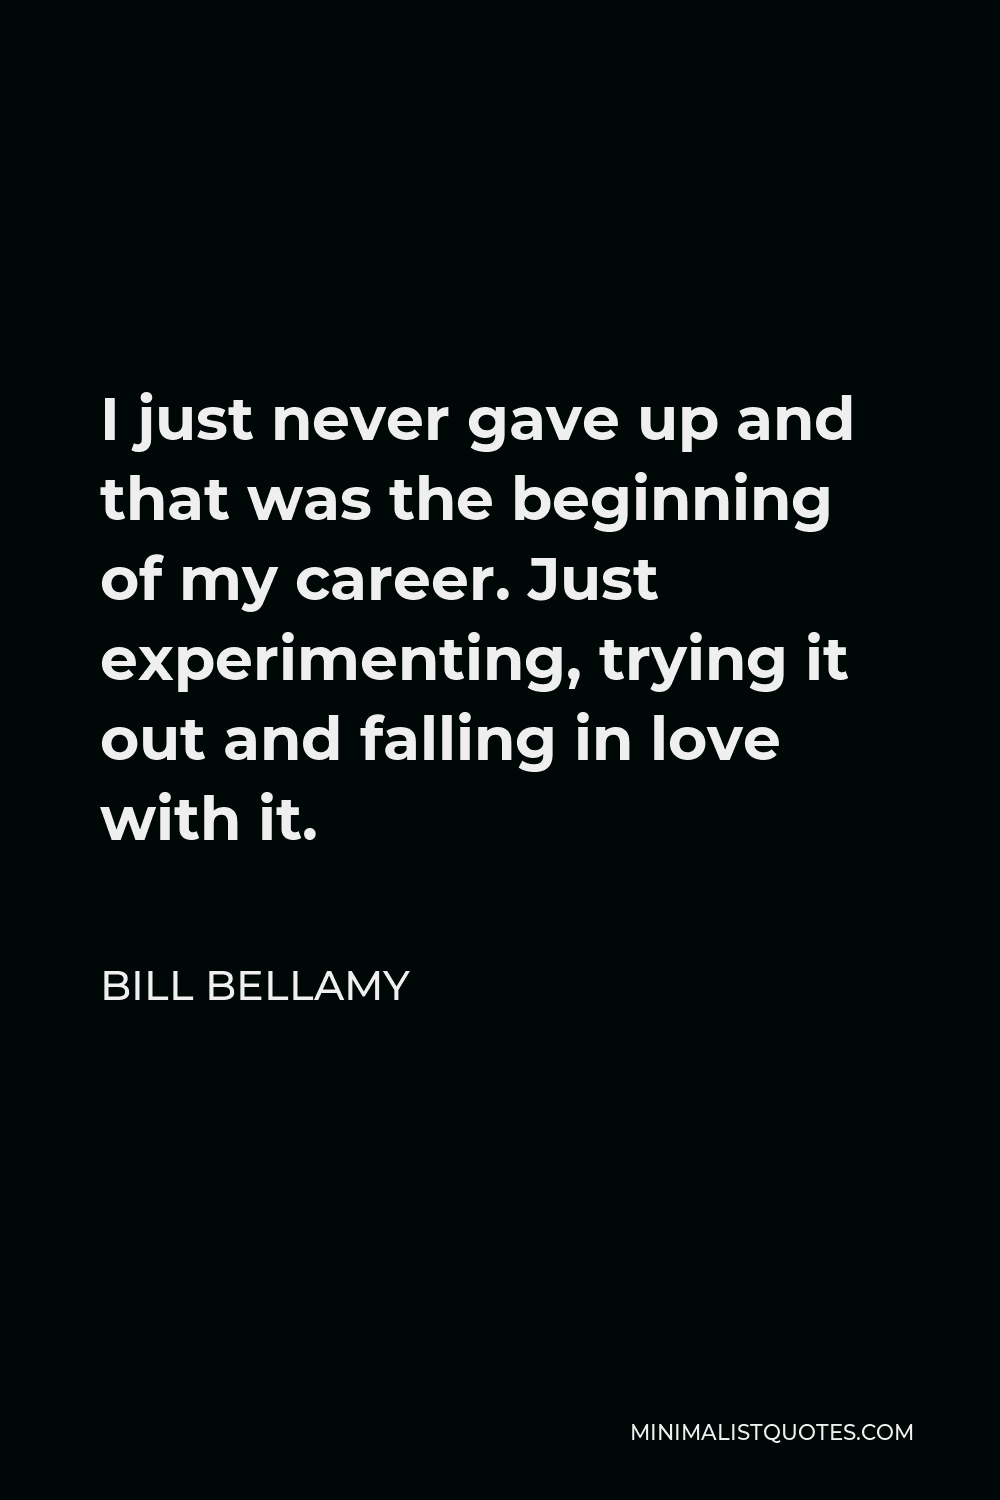 Bill Bellamy Quote - I just never gave up and that was the beginning of my career. Just experimenting, trying it out and falling in love with it.